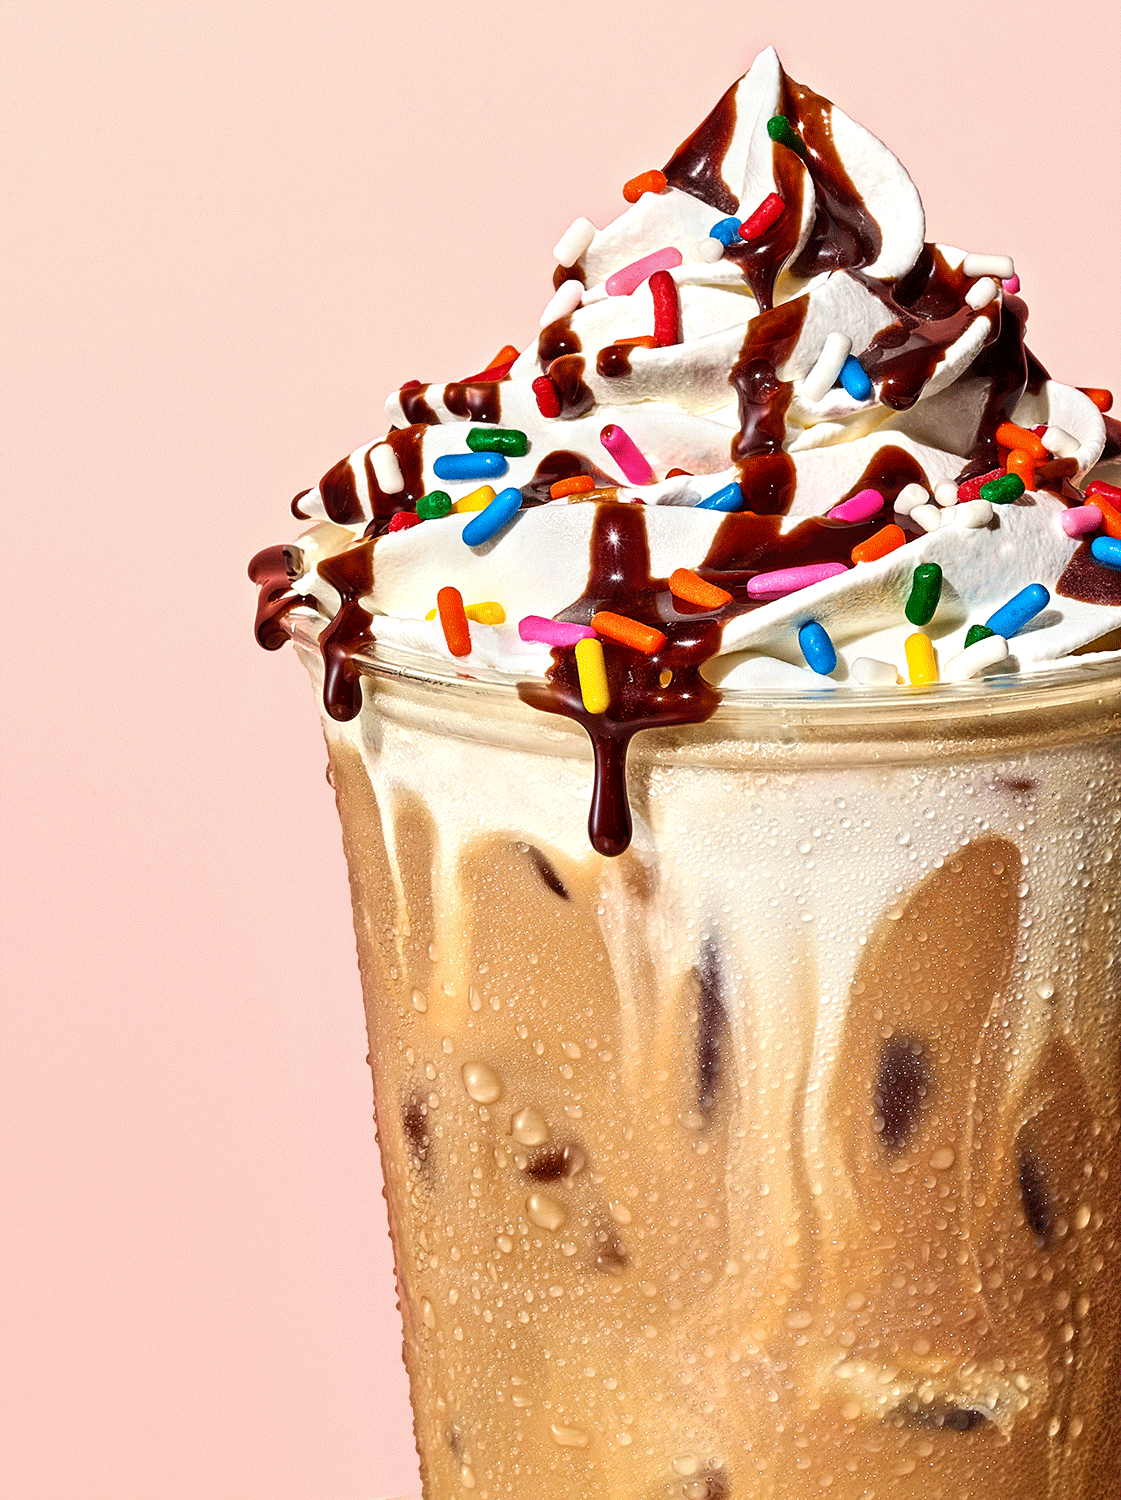 Iced-Coffe-with-Sprinkles-01-ANIMATION